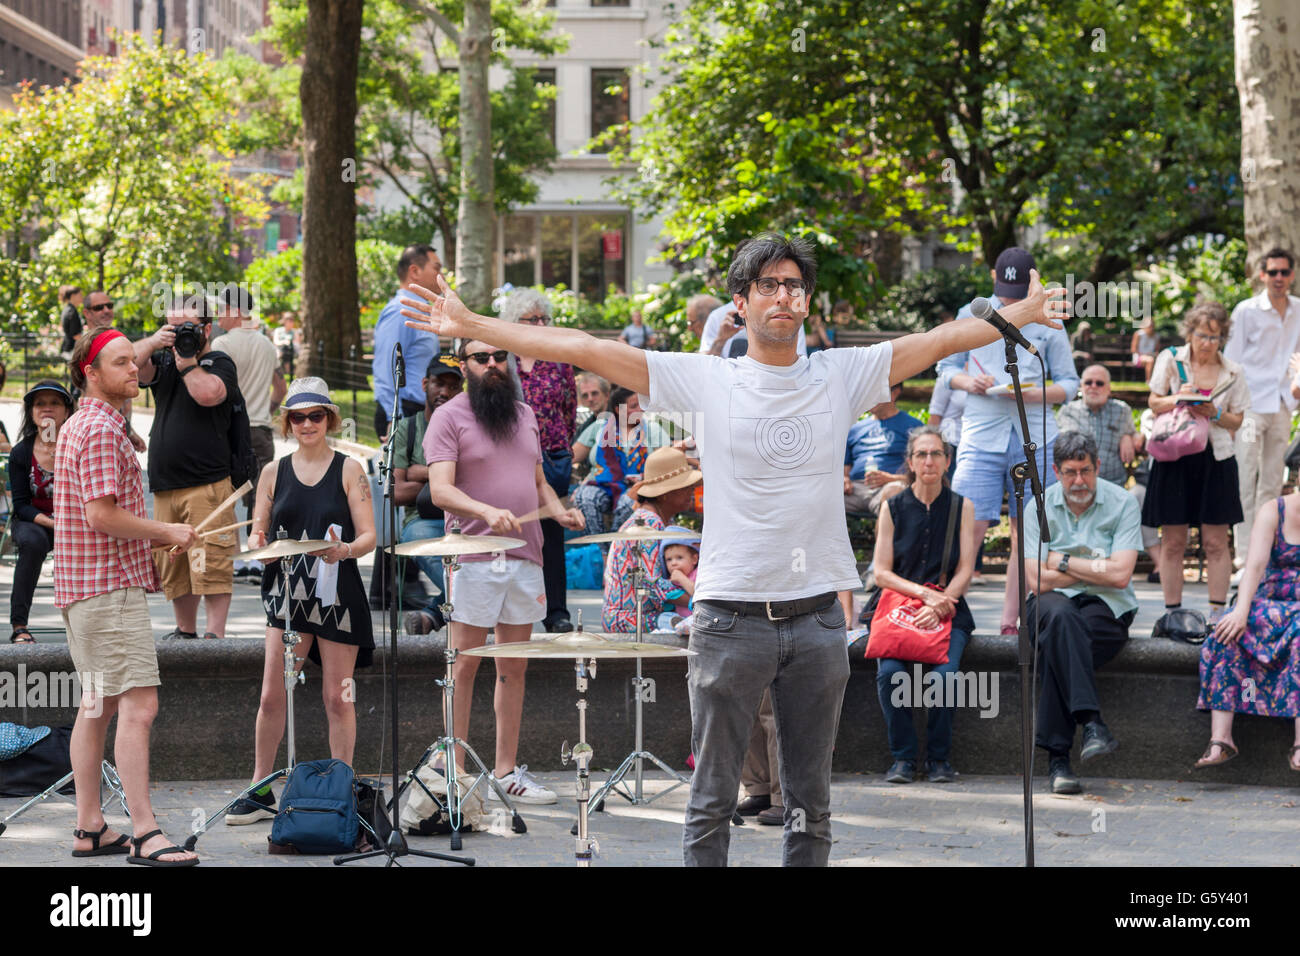 Brian Chase of the Yeah Yeah Yeahs leads percussionists on cymbals at a performance of his work 'Shimmer' during the summer Make Music New York festival in Madison Square Park in New York on Tuesday, June 21, 2016.  Make Music New York coordinates over 1,000 free concerts in public spaces on the first day of Summer. 'Shimmer' explores the sonic potential of cymbals.  (© Richard B. Levine) Stock Photo